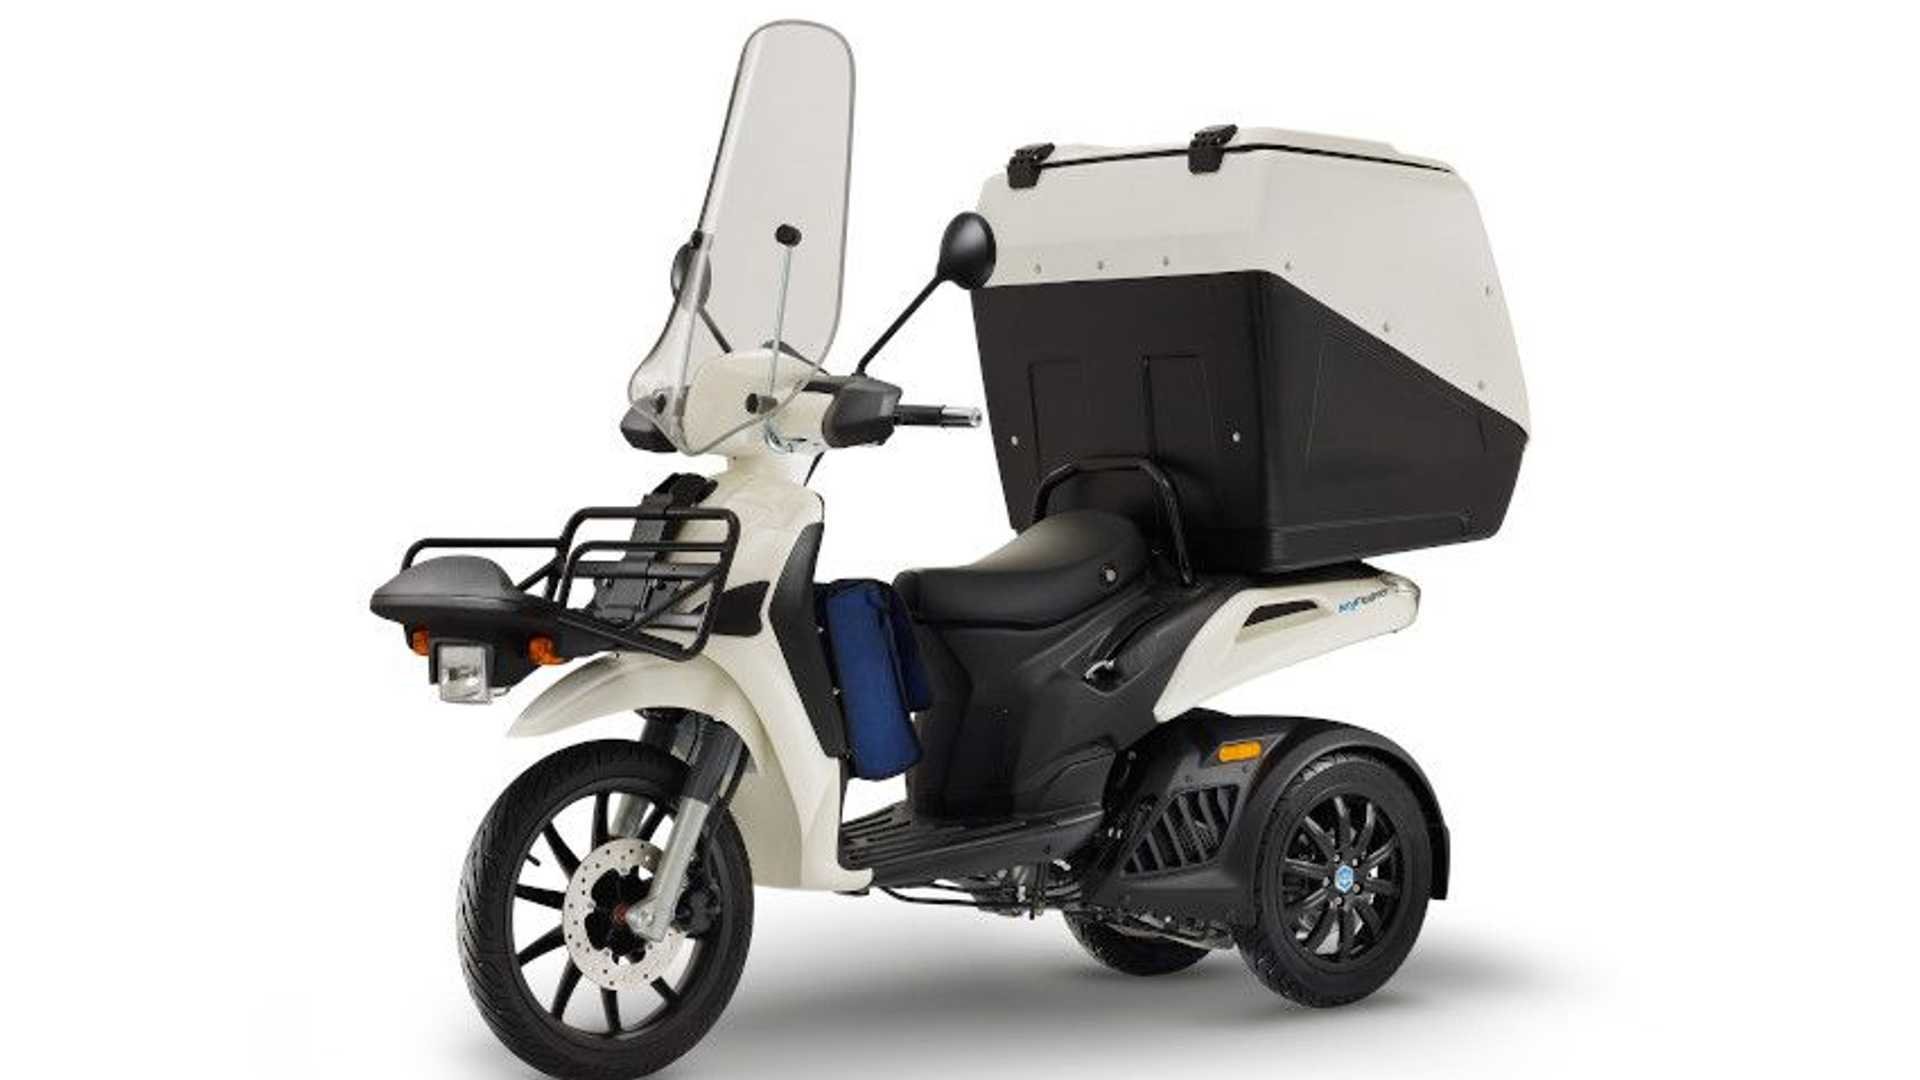 the-piaggio-mymover-is-a-cute-delivery-three-wheeled-moped.jpg